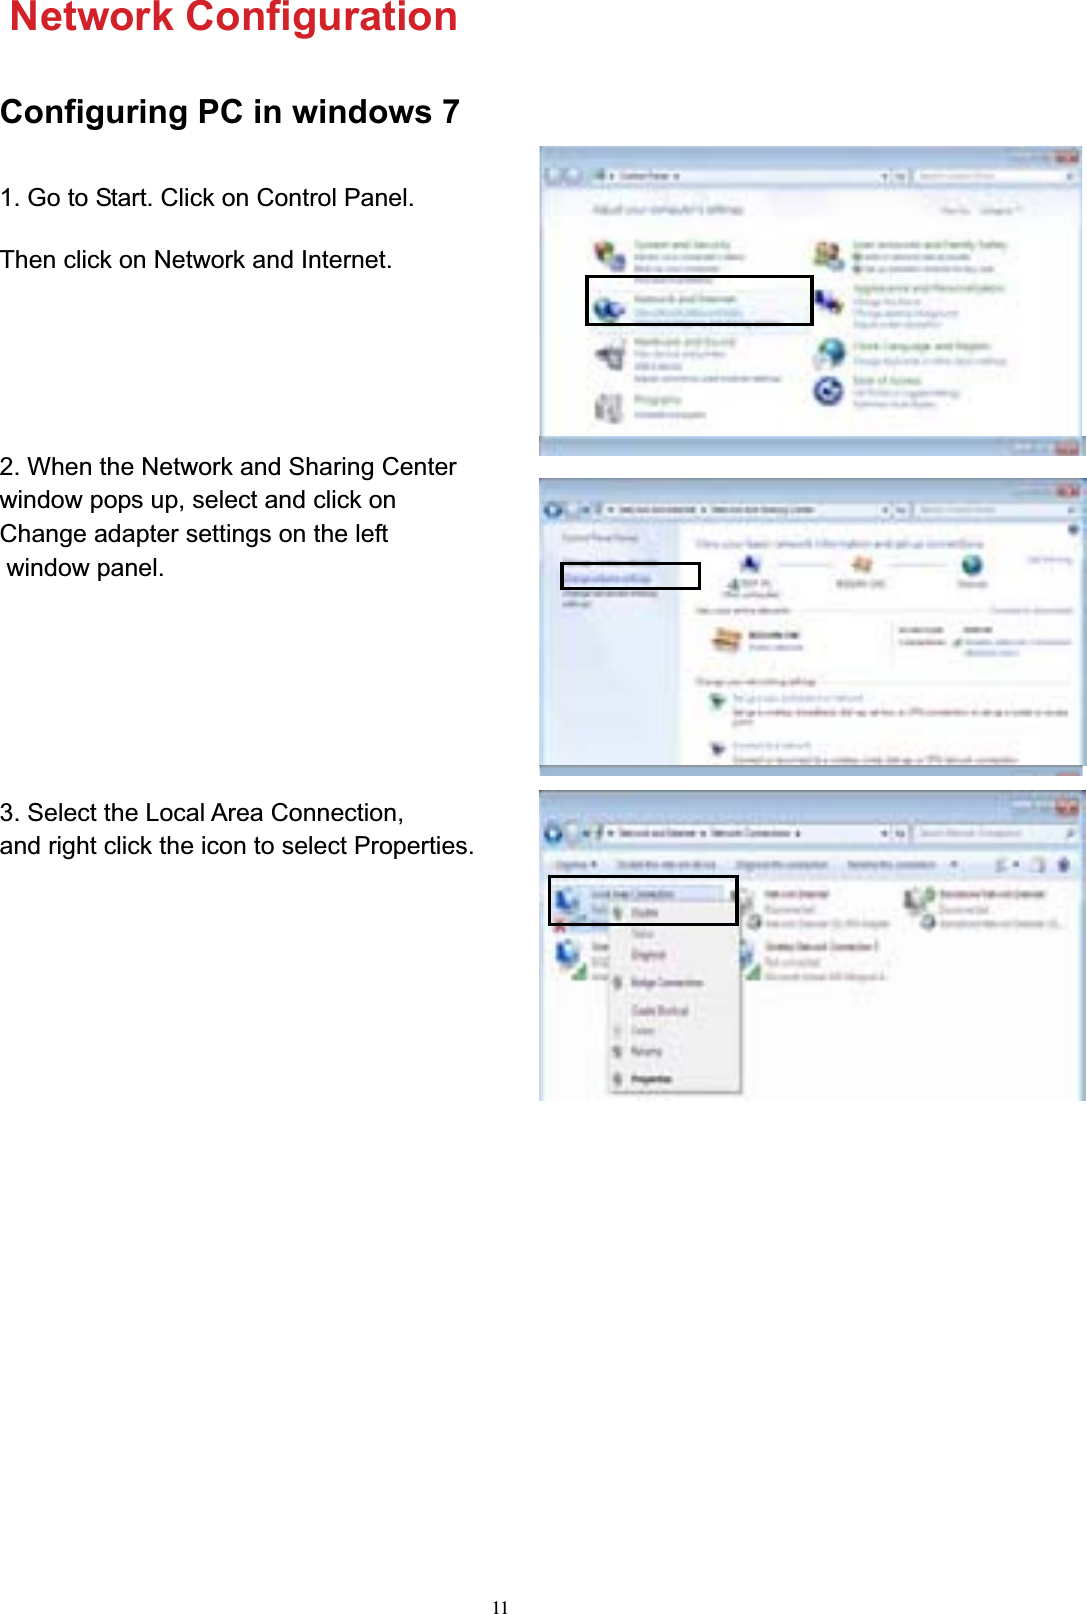 11Network Configuration Configuring PC in windows 7Then click on Network and Internet.2. When the Network and Sharing Centerwindow pops up, select and click on  Change adapter settings on the left  window panel. 3. Select the Local Area Connection,  and right click the icon to select Properties.1. Go to Start. Click on Control Panel. 